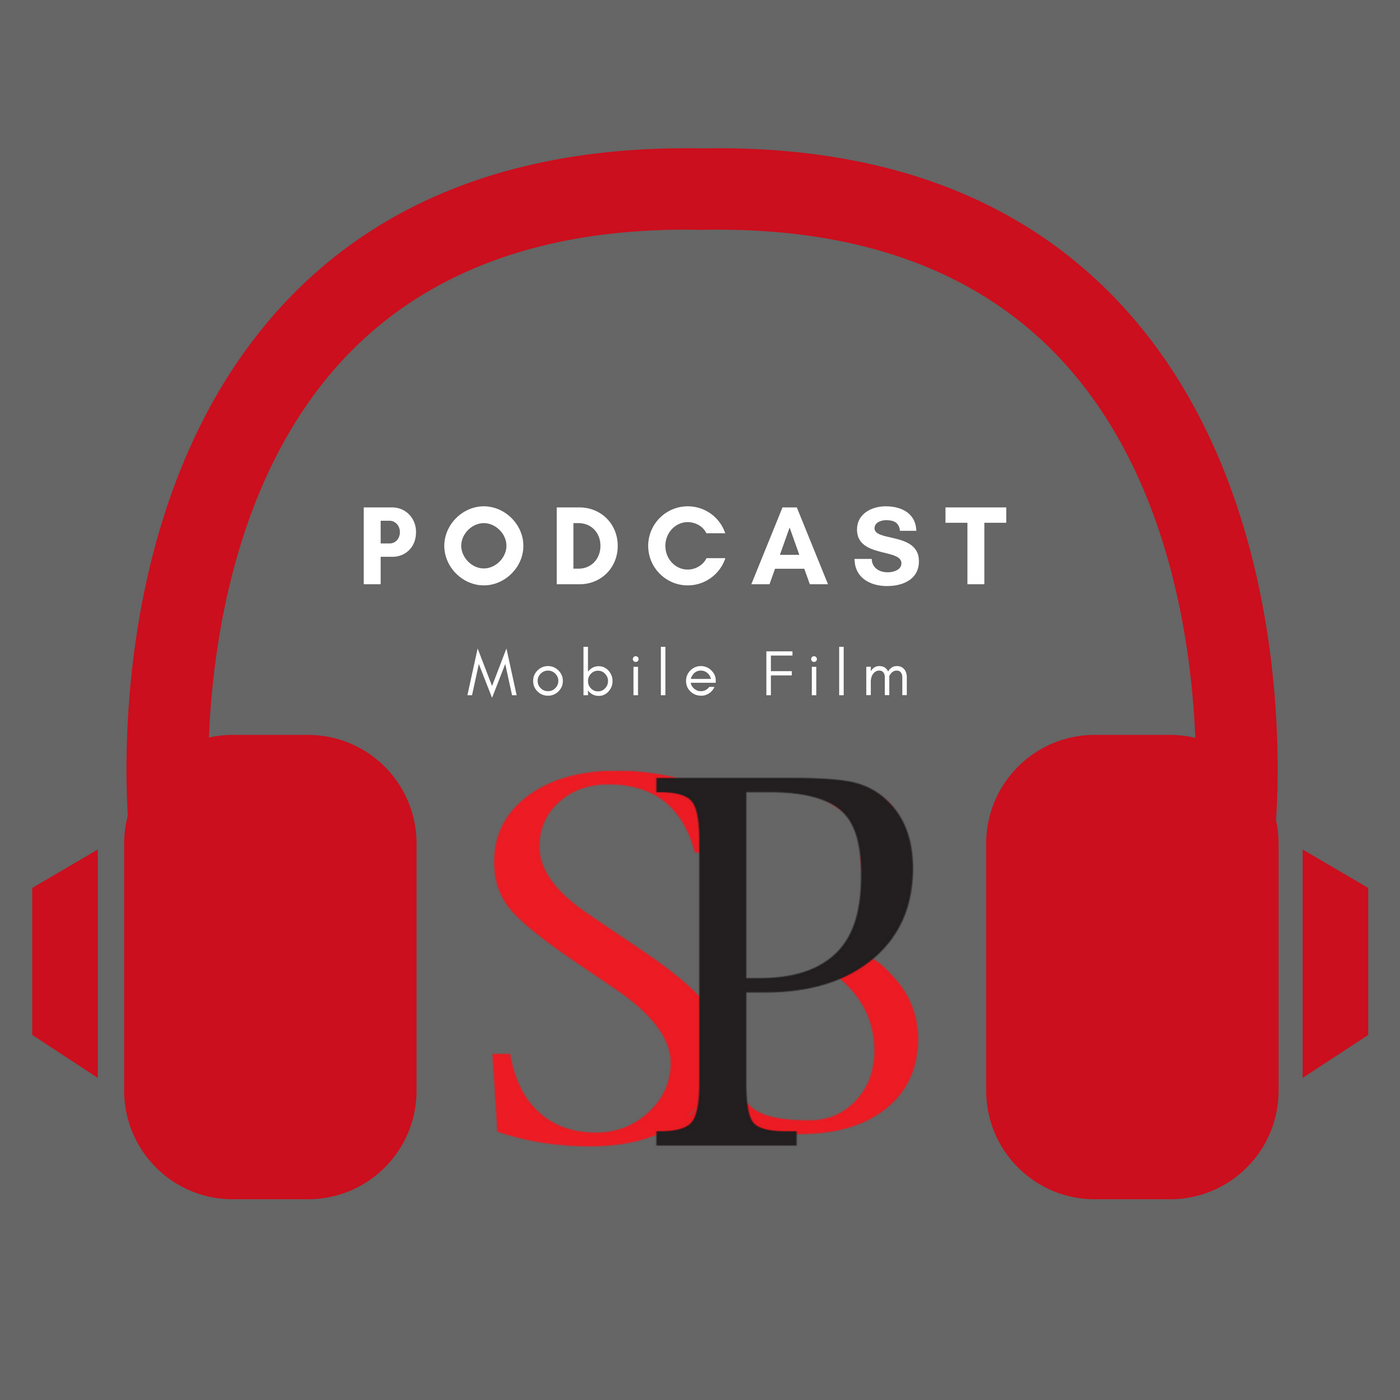 Sponsoring the International Mobile Film Festival and Audio Production with Jana and Neal Hallford Episode 35